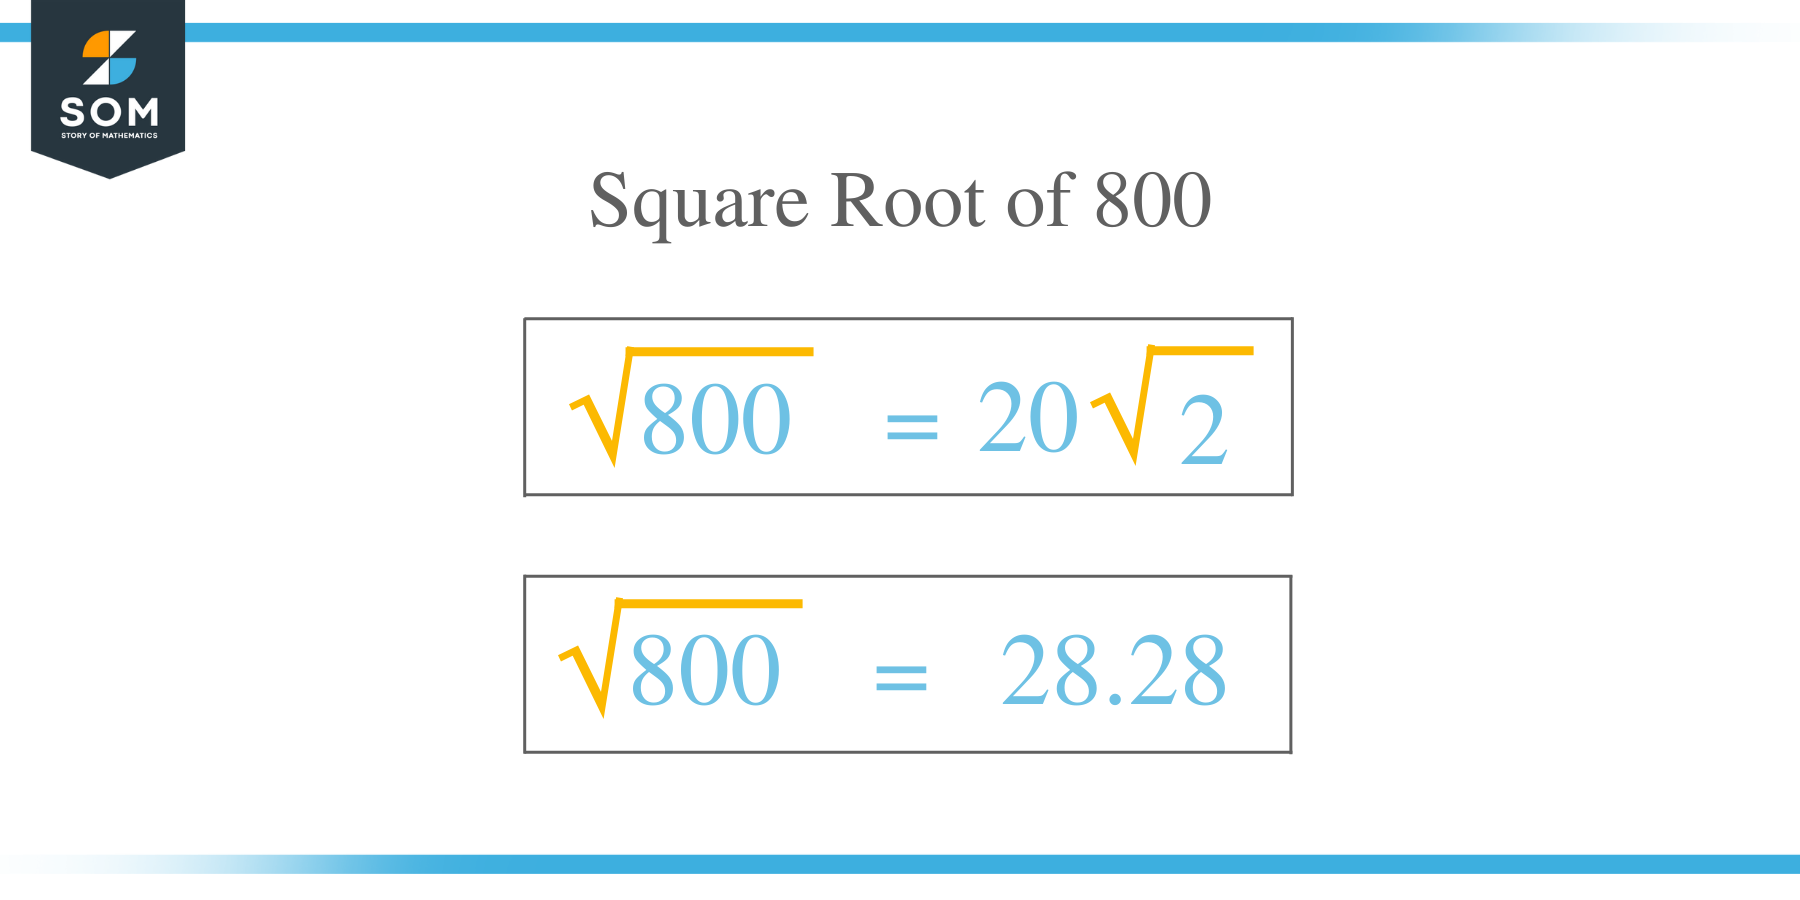 Square Root of 800